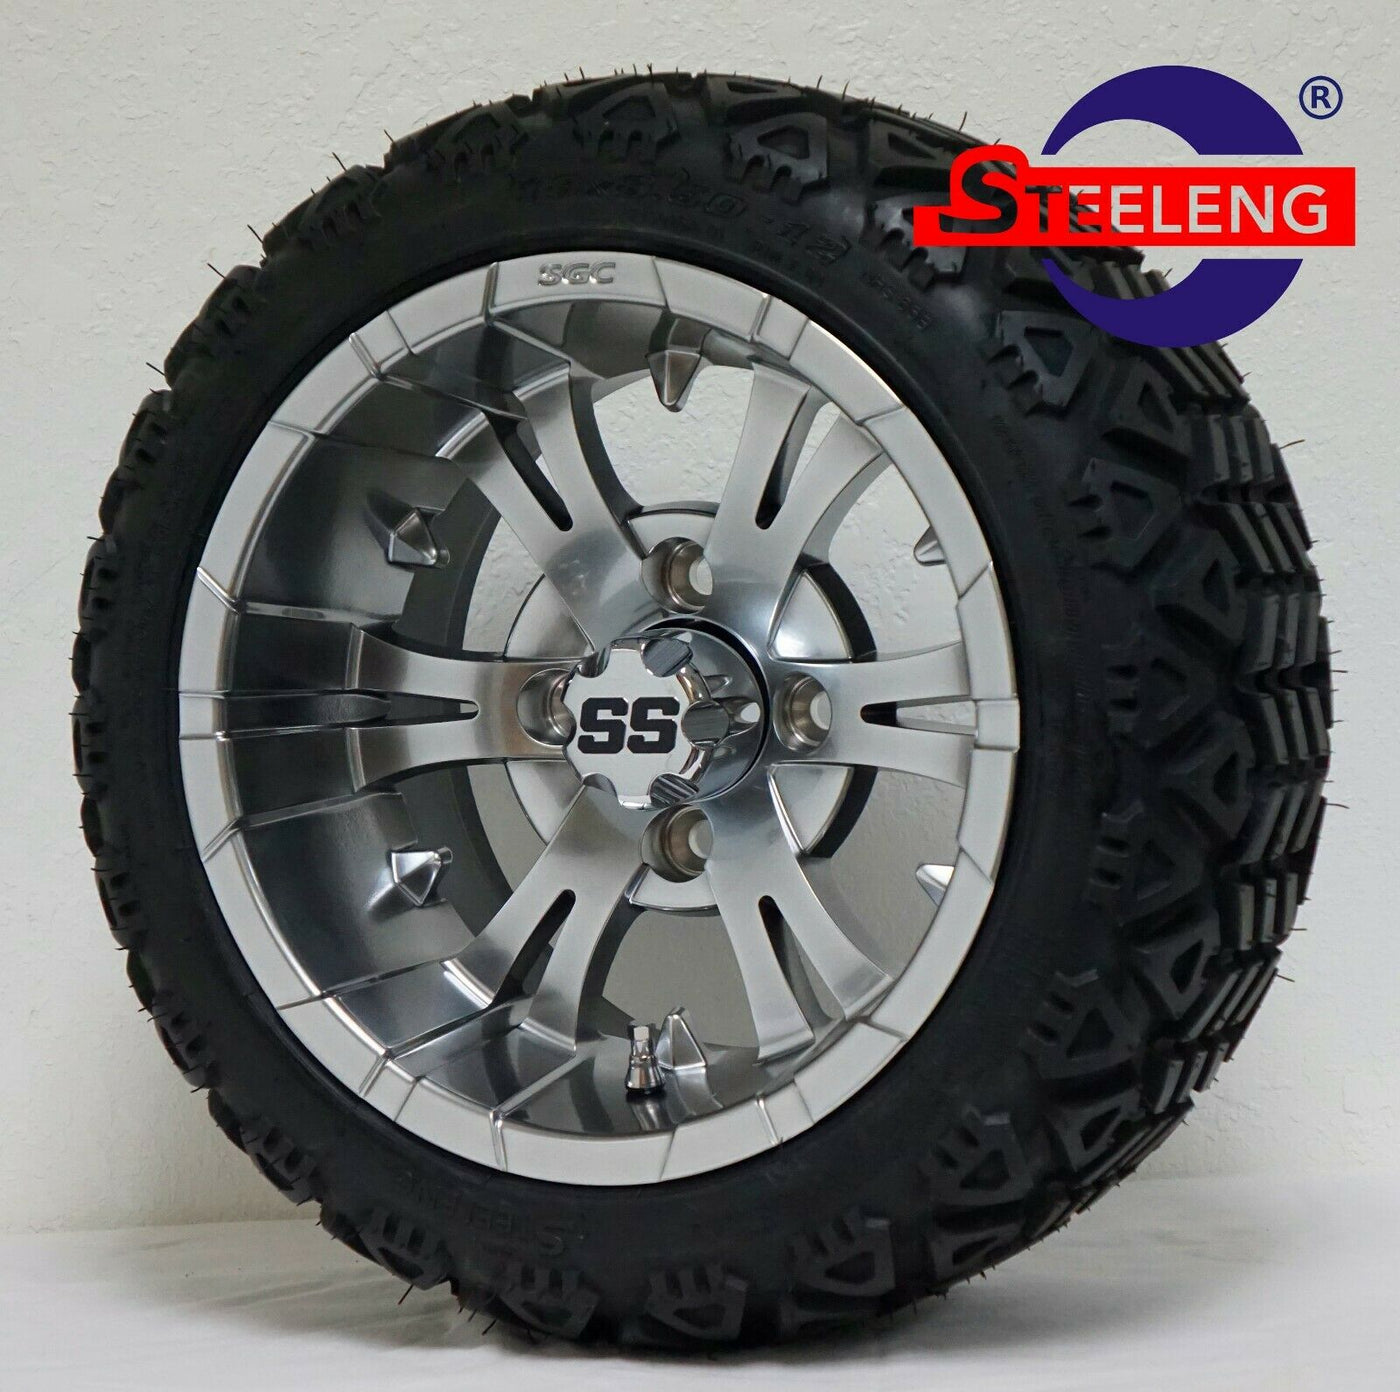 12" VAMPIRE MAGNETIC GOLF CART WHEELS and 12x7-18 ALL TERRAIN TIRES (SET OF 4) WITH LUGS